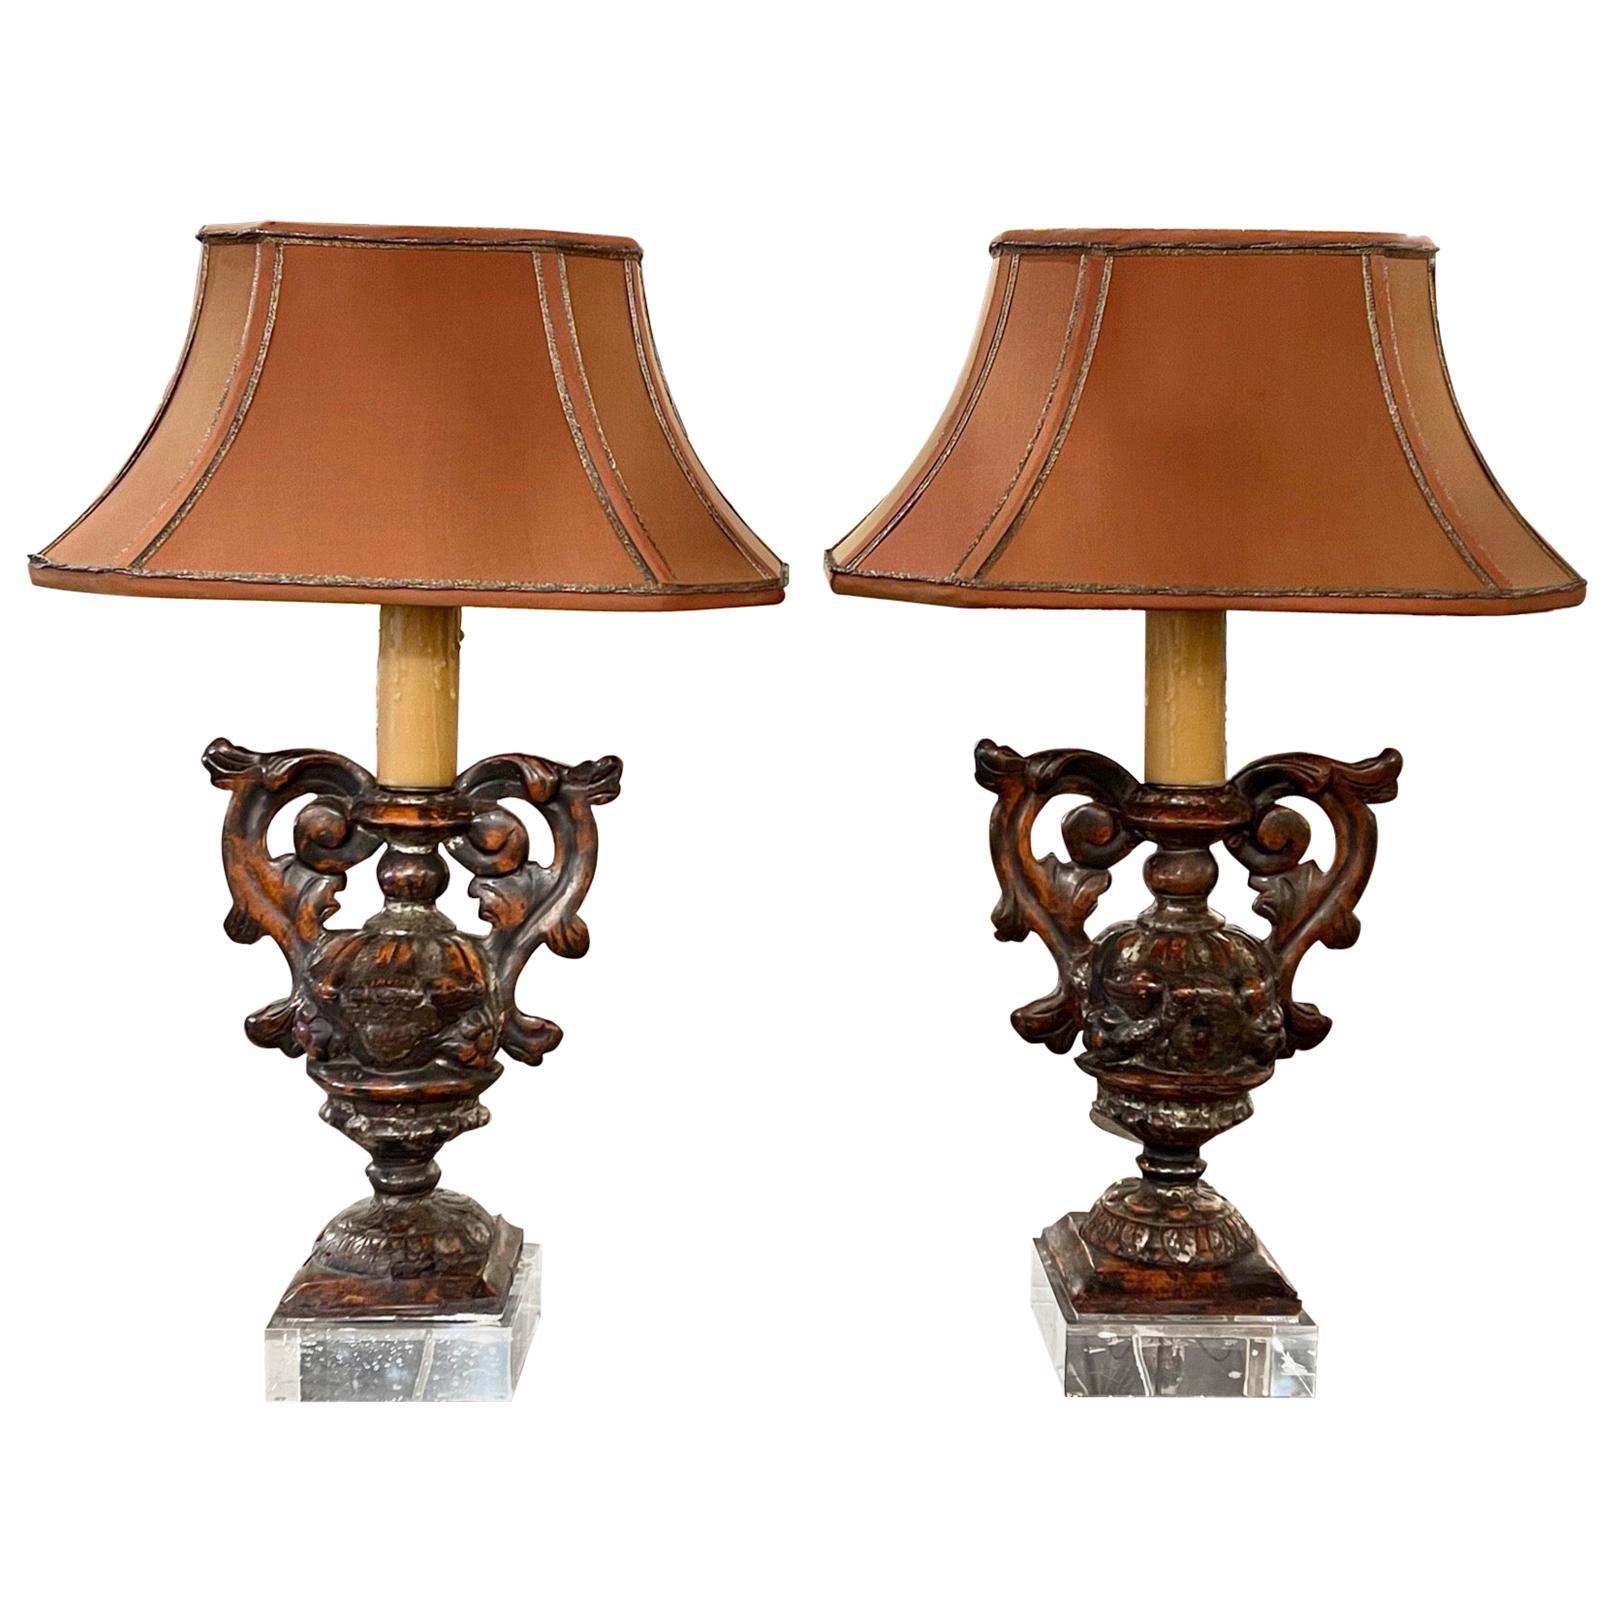 Pair of 18th Century Italian Carved and Polychromed Wood Urn Lamps